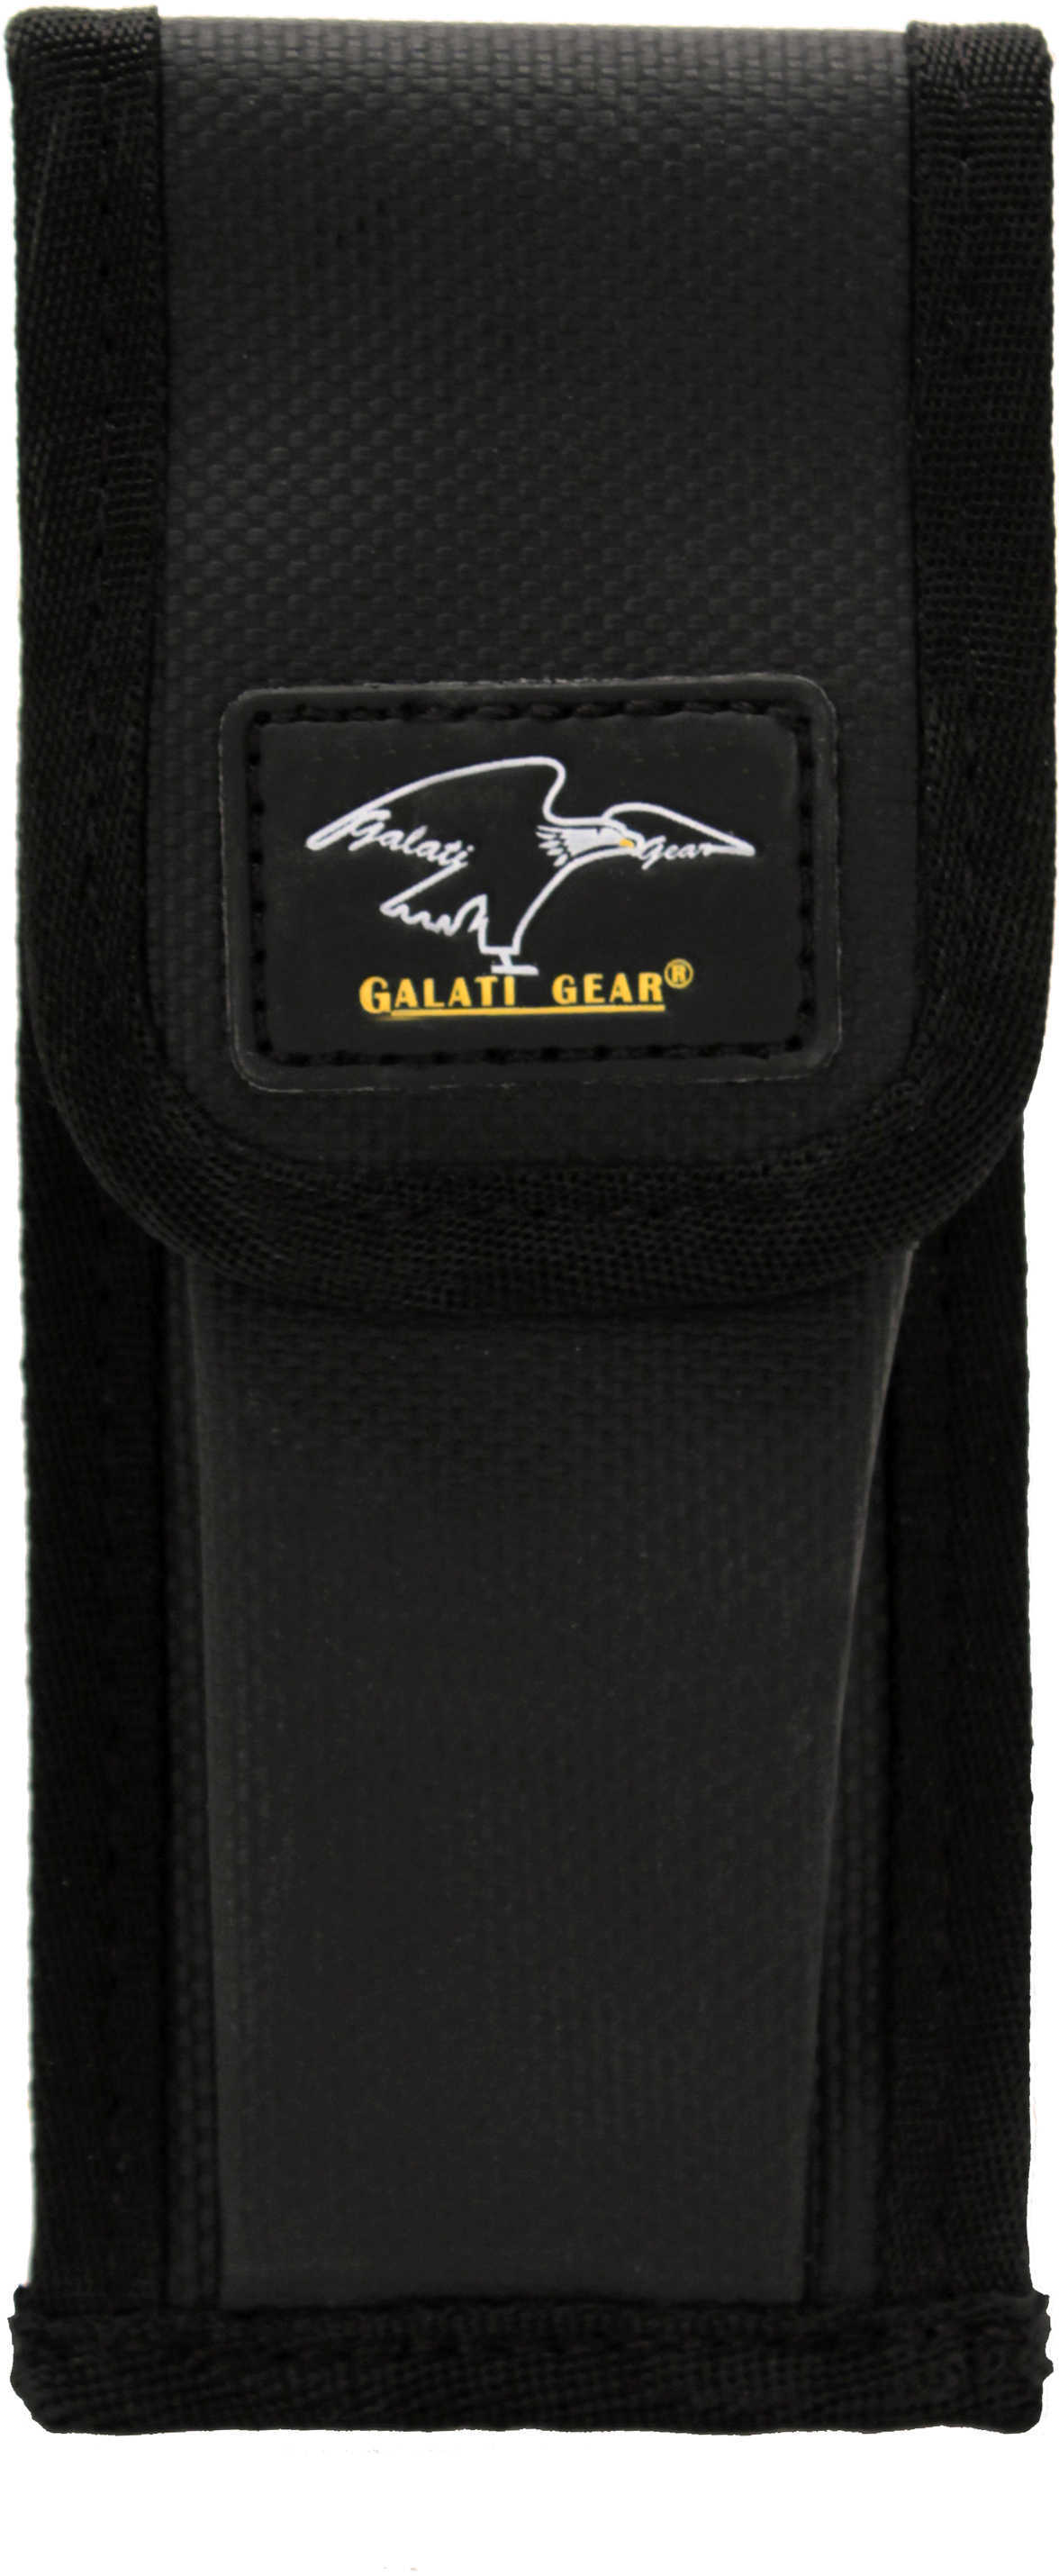 Galati Gear Single Pistol Mag Pouch Black 45 Auto Nylon Holds And Knife GLMP1